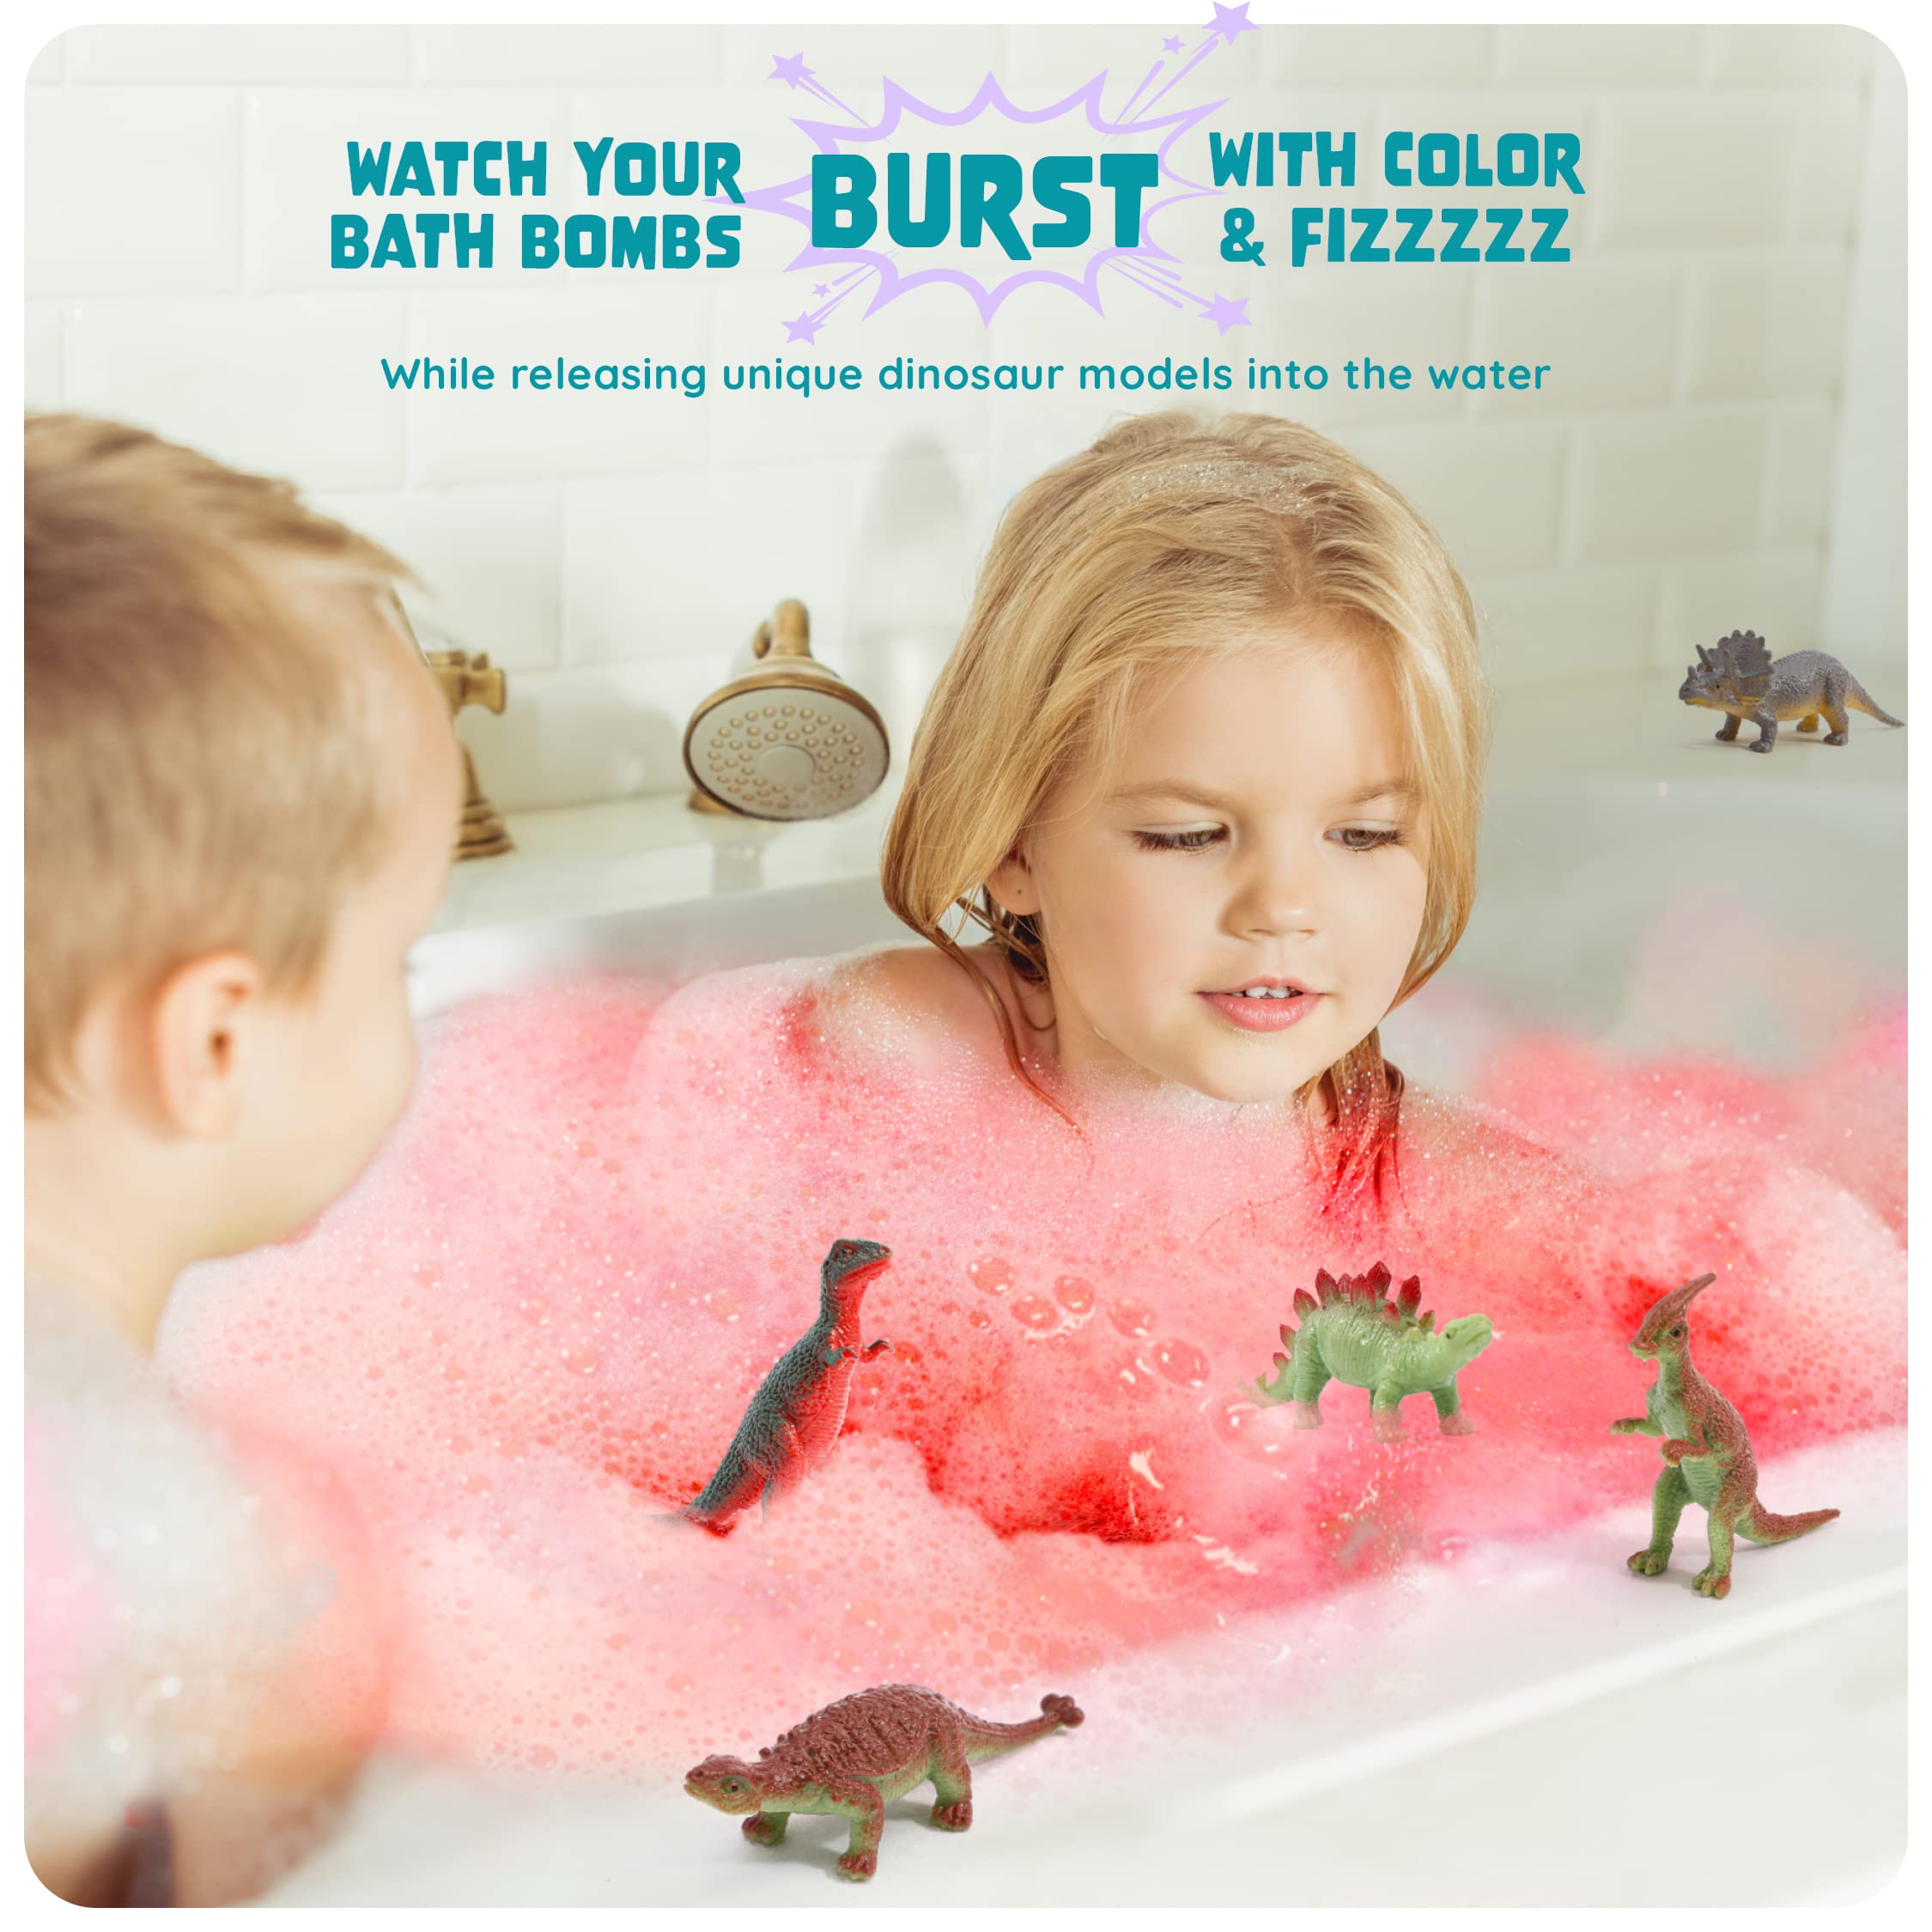 Dino Egg Bath Bombs for Kids - Easter Kids Bath Bomb with Surprise Inside - Dinosaur Toys Gift for Boys and Girls Ages 3 4 5 6 7 & 8 Years Old Toy Kid Gifts - Fun Educational Bath Toys. Dino Fizzy Set